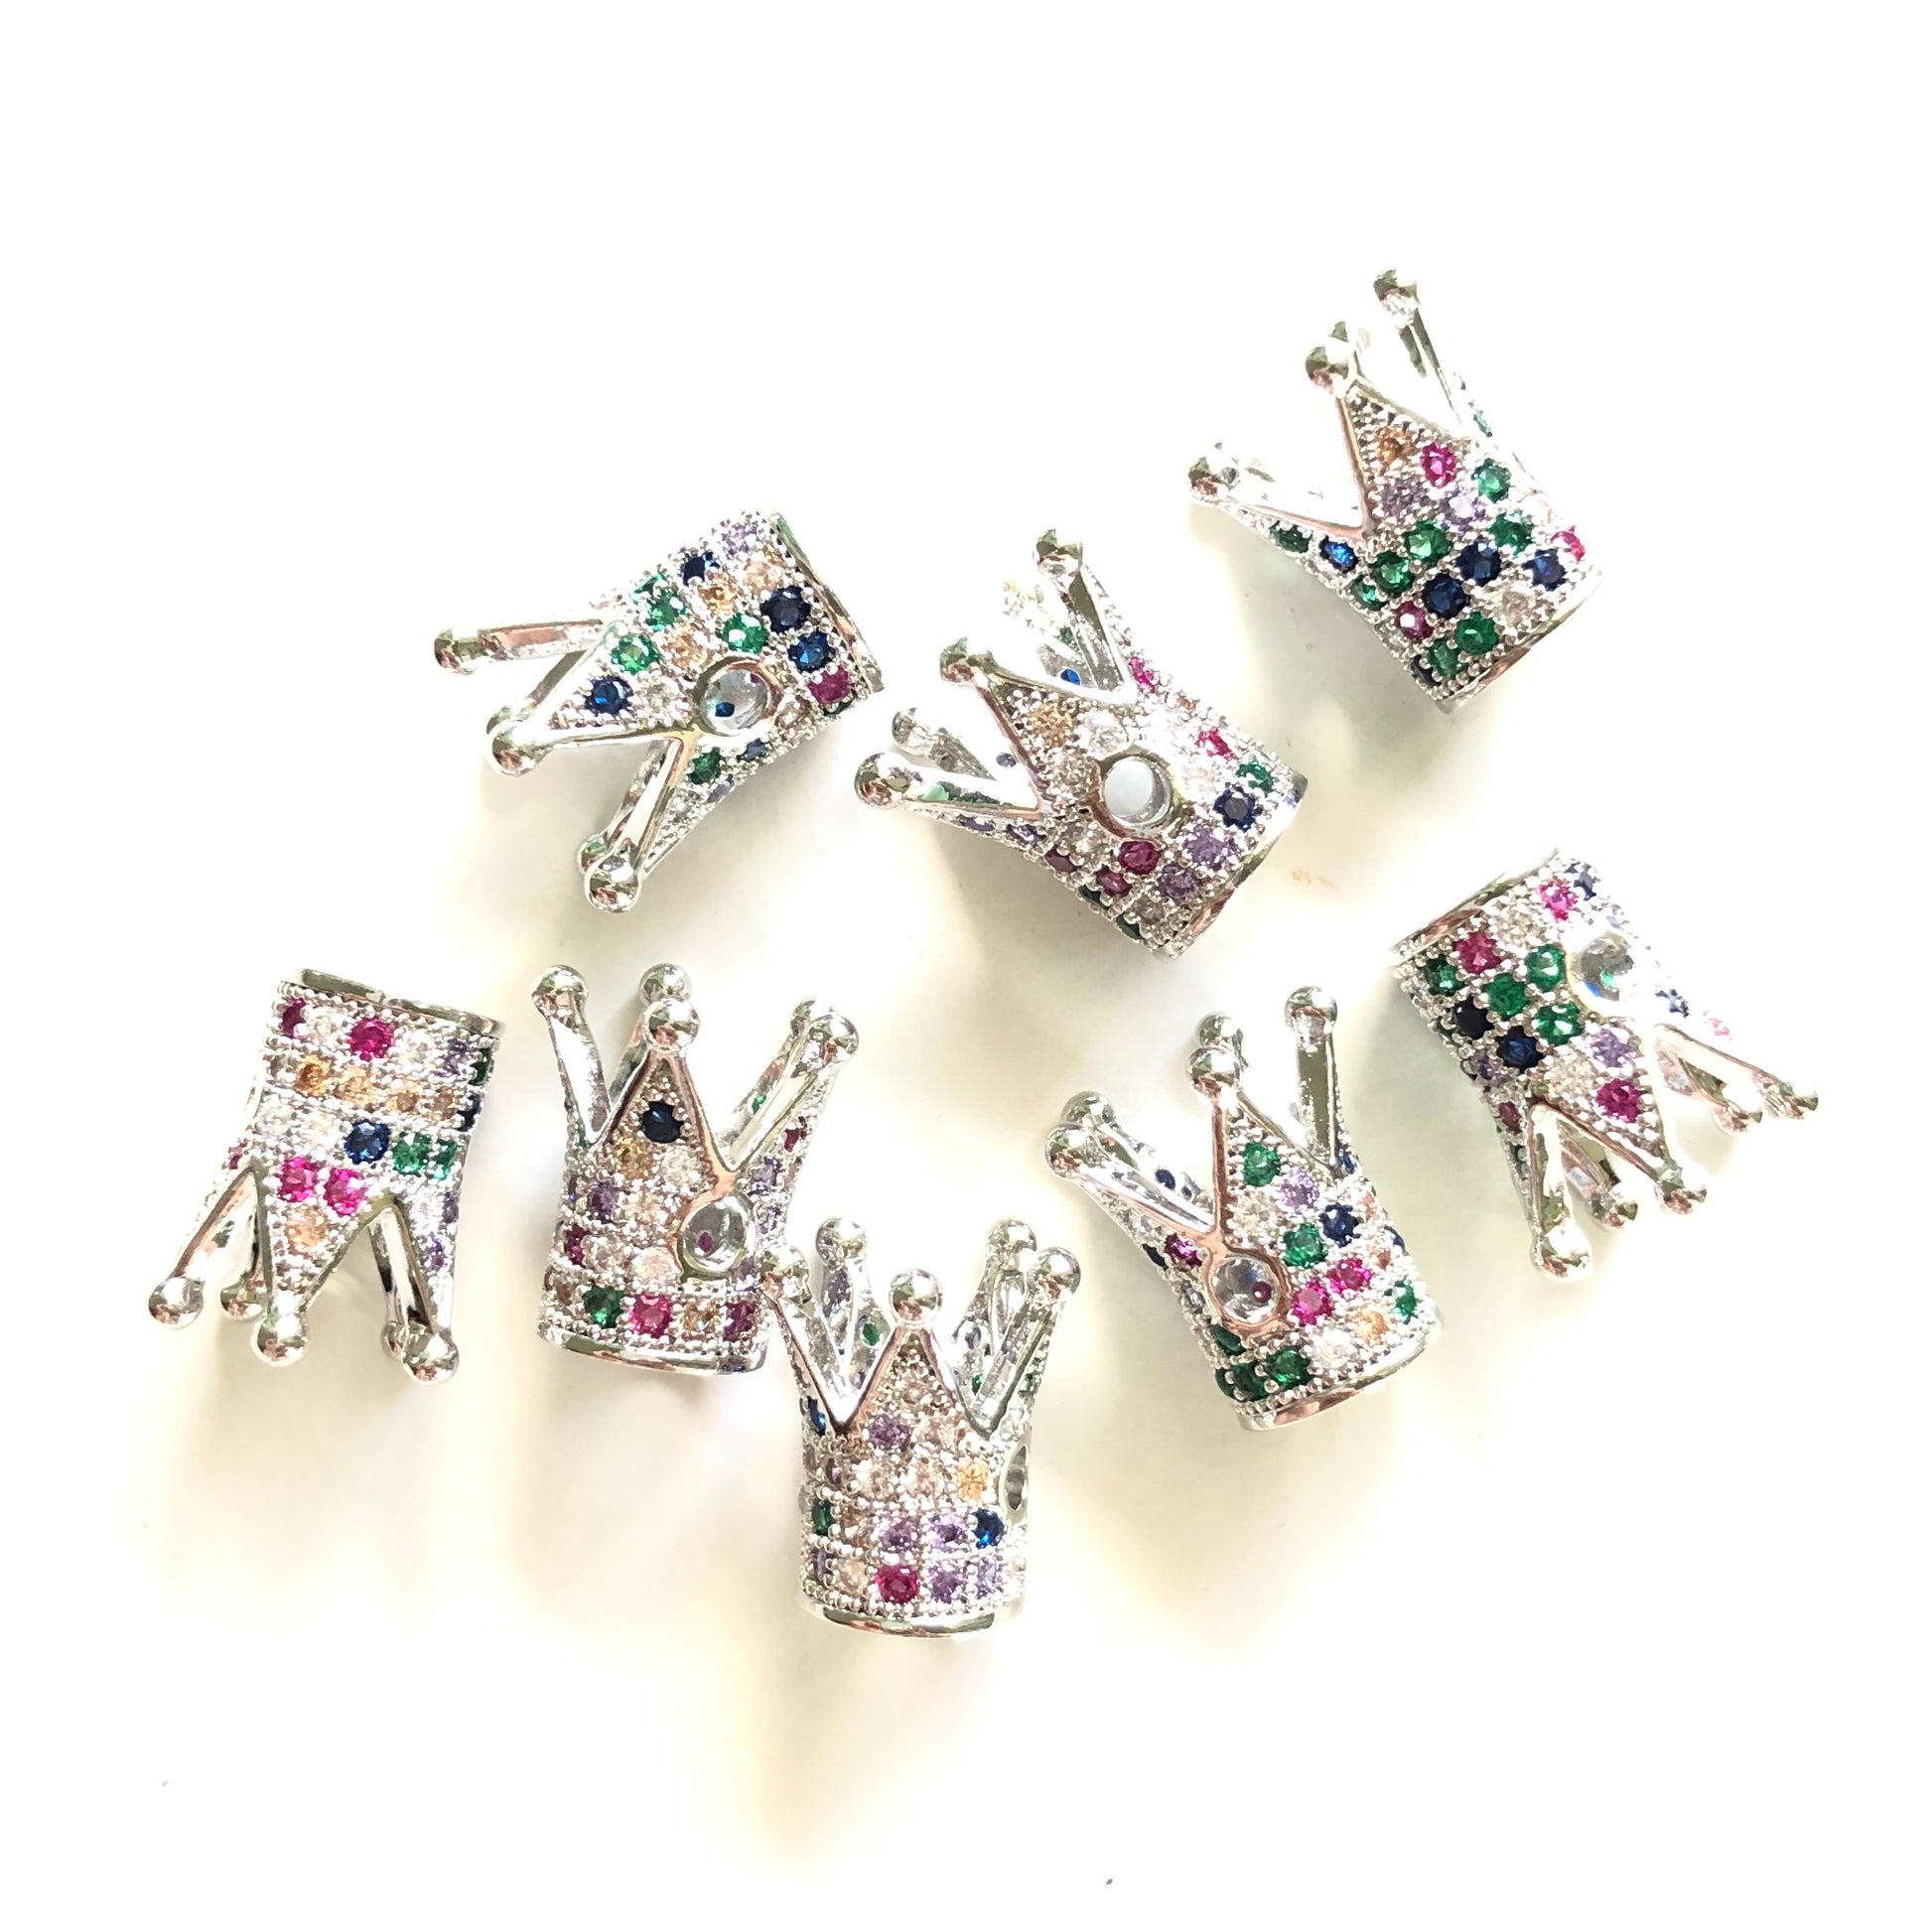 10pcs/lot Multicolor CZ Paved Crown Spacers Silver CZ Paved Spacers Colorful Zirconia Crown Beads Charms Beads Beyond